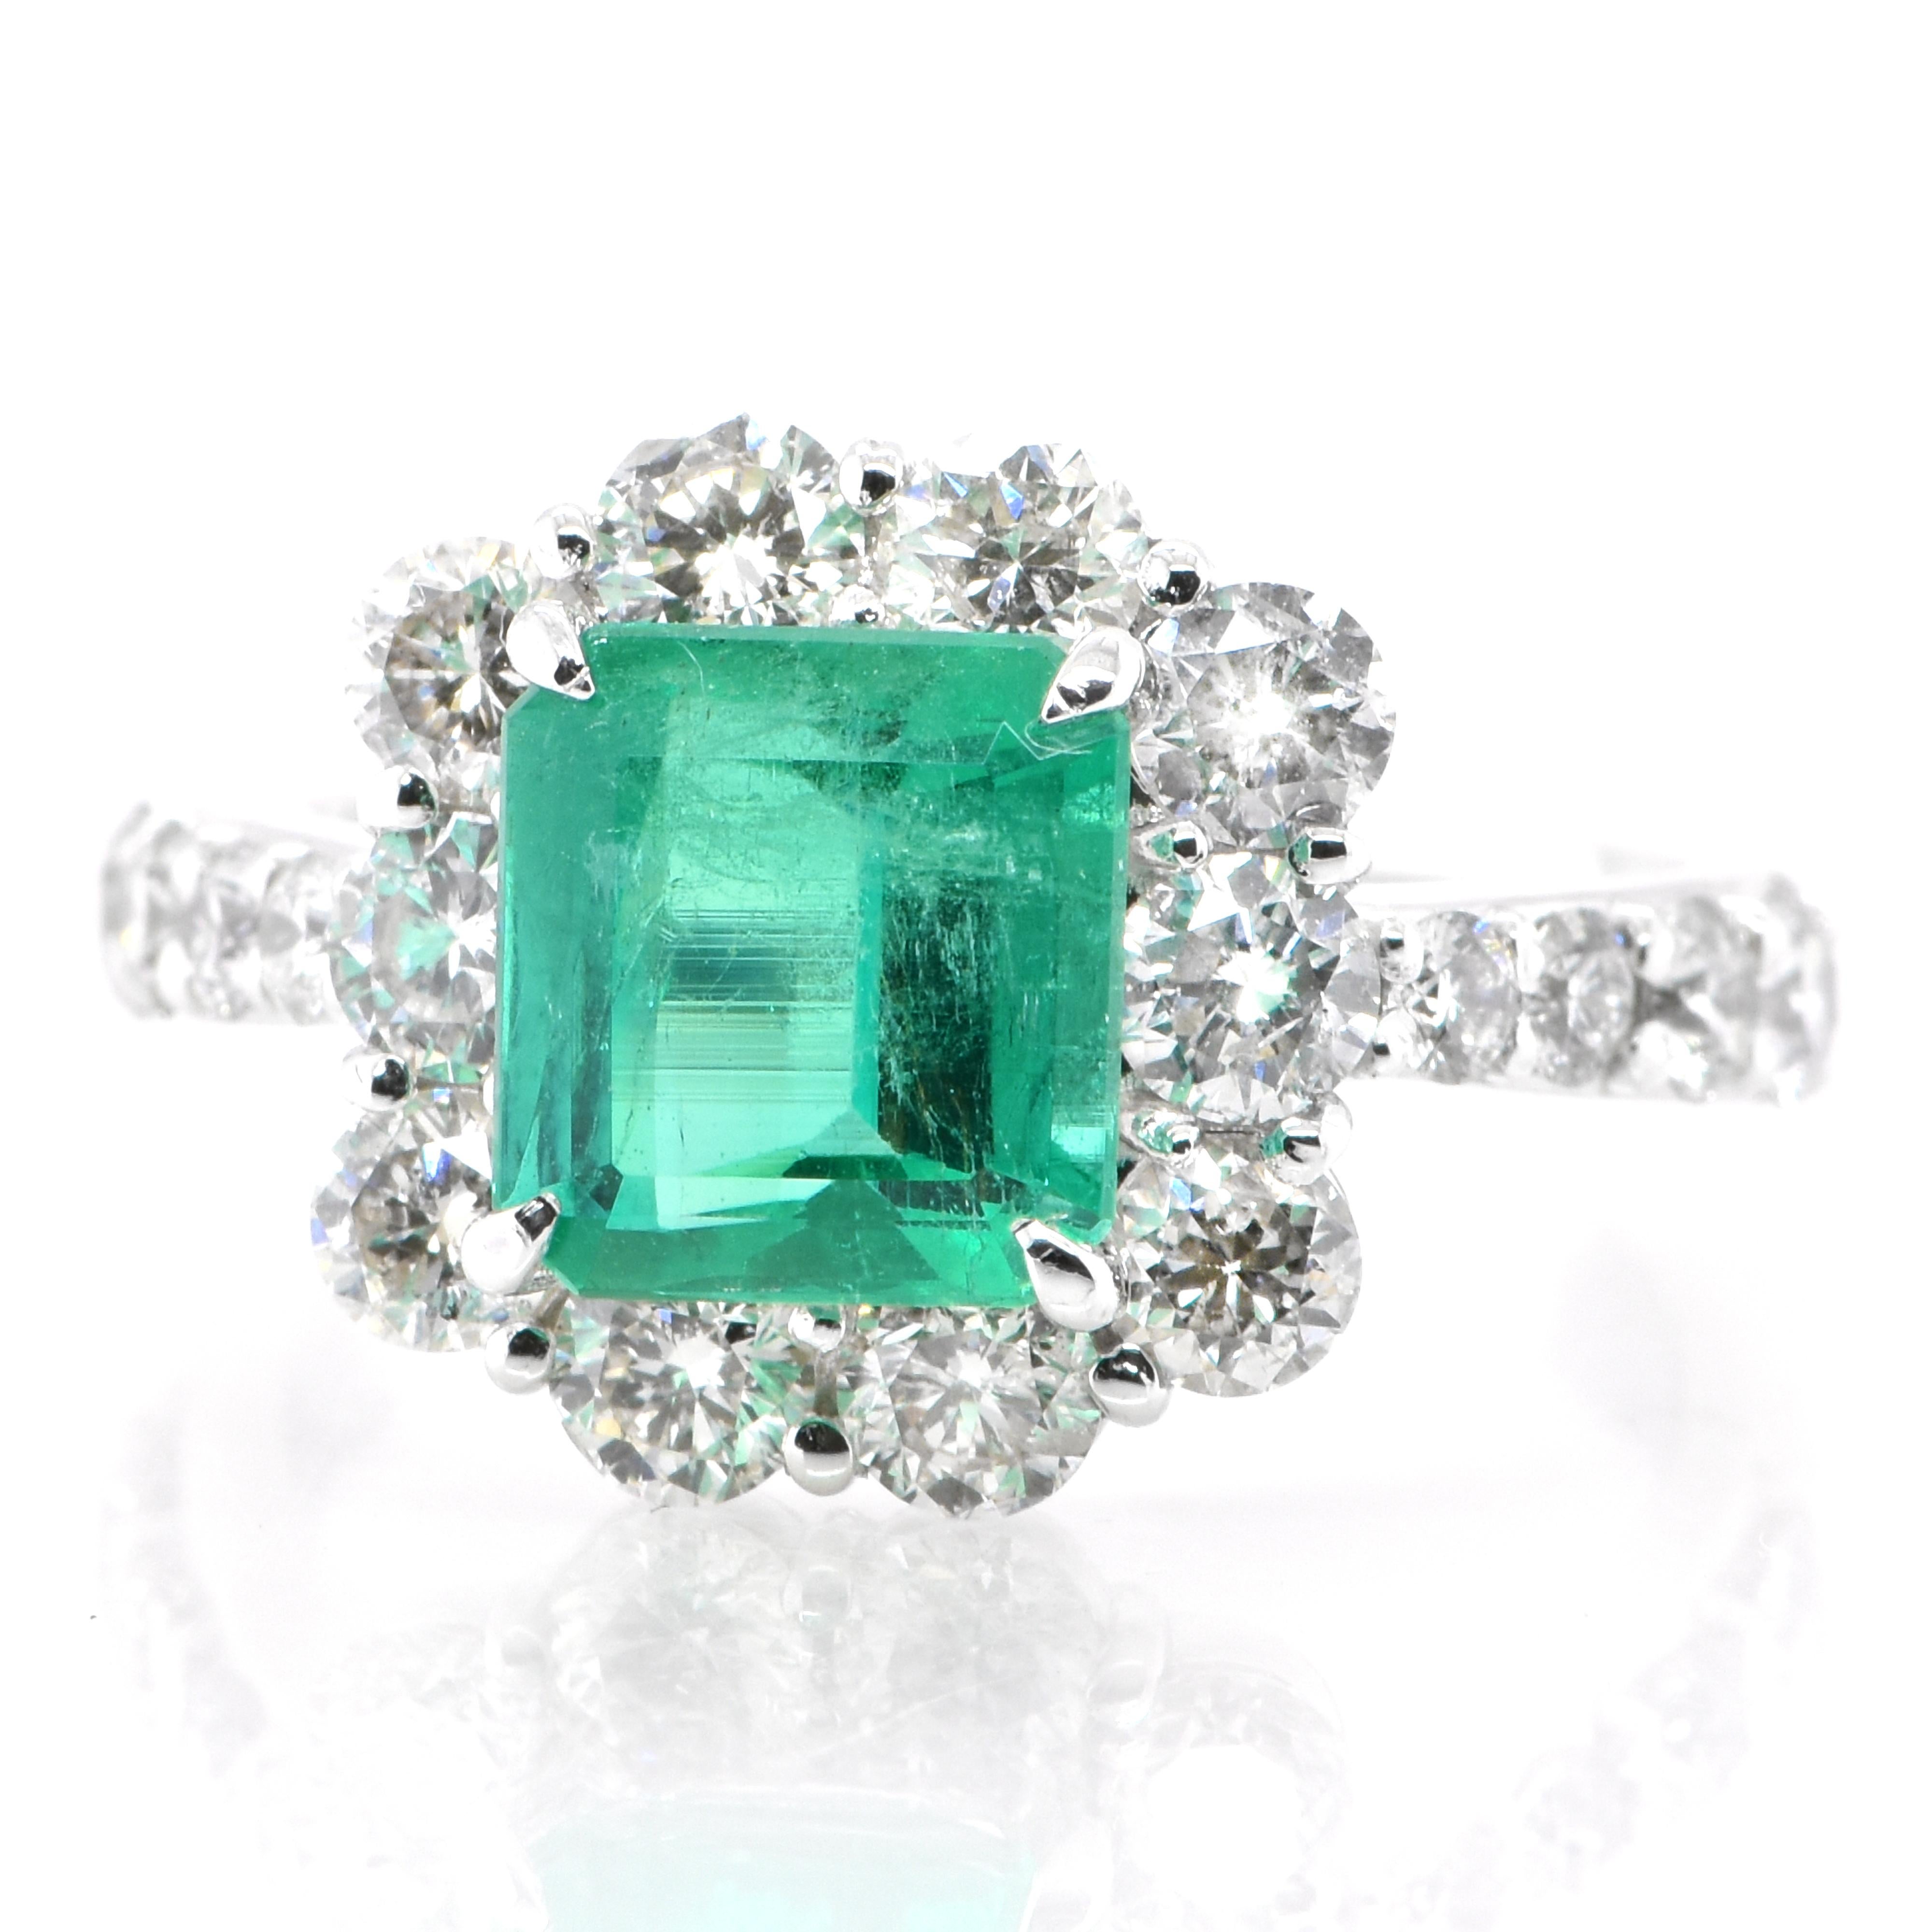 A stunning ring featuring a 1.86 Carat Natural Emerald and 1.62 Carats of Diamond Accents set in Platinum. People have admired emerald’s green for thousands of years. Emeralds have always been associated with the lushest landscapes and the richest